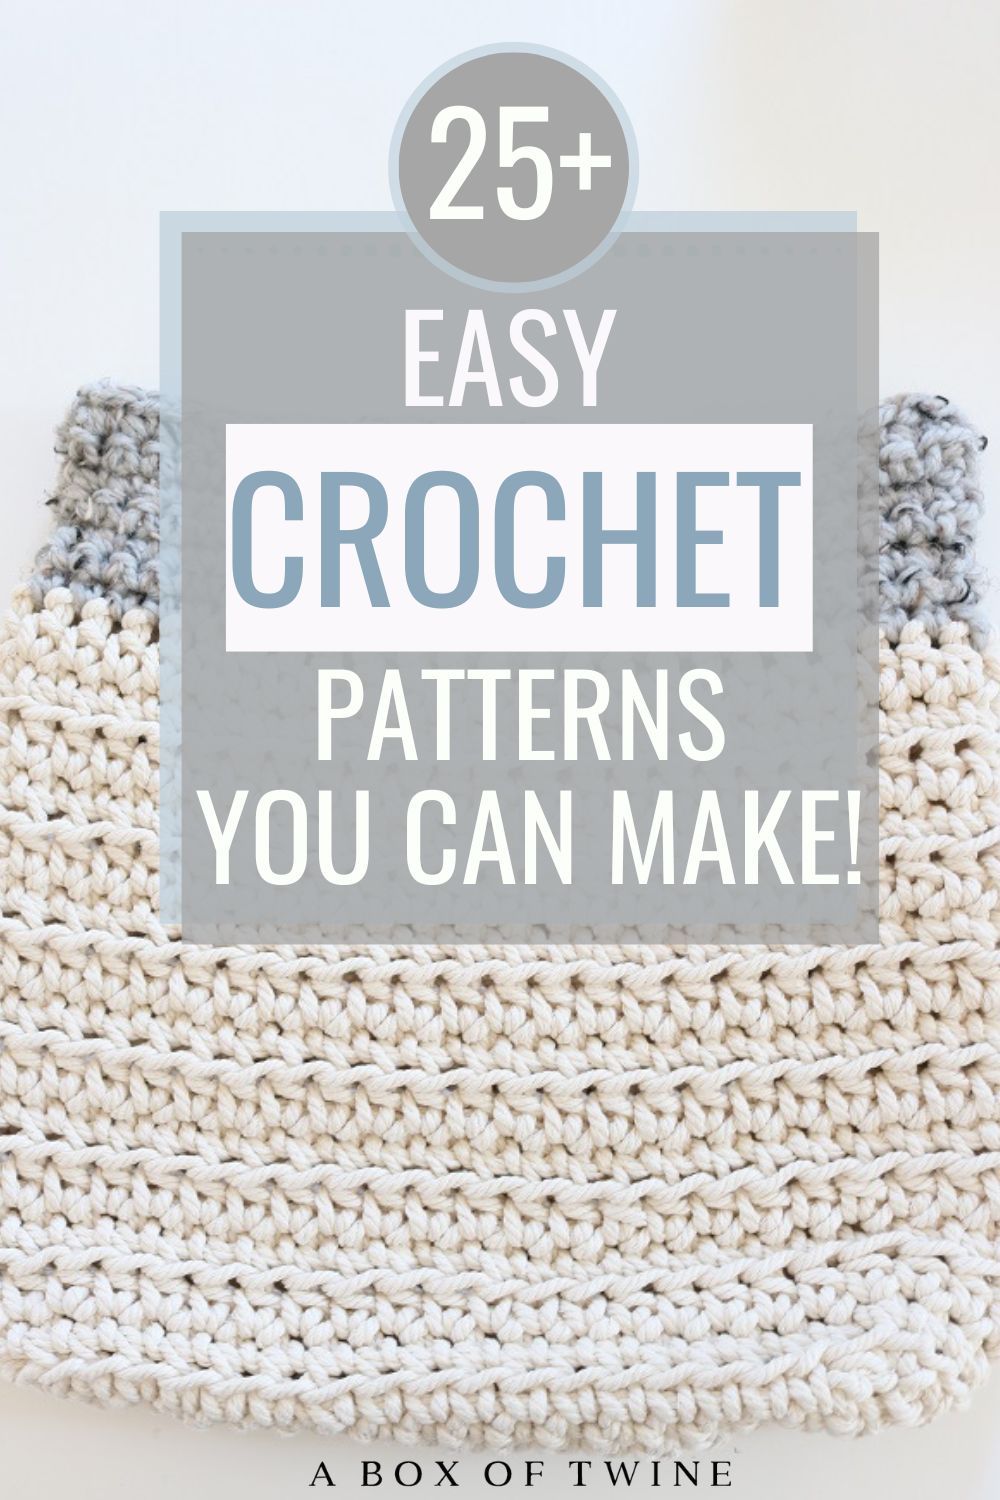 Over 25 Easy Crochet Patterns for Beginners {FREE} - A BOX OF TWINE